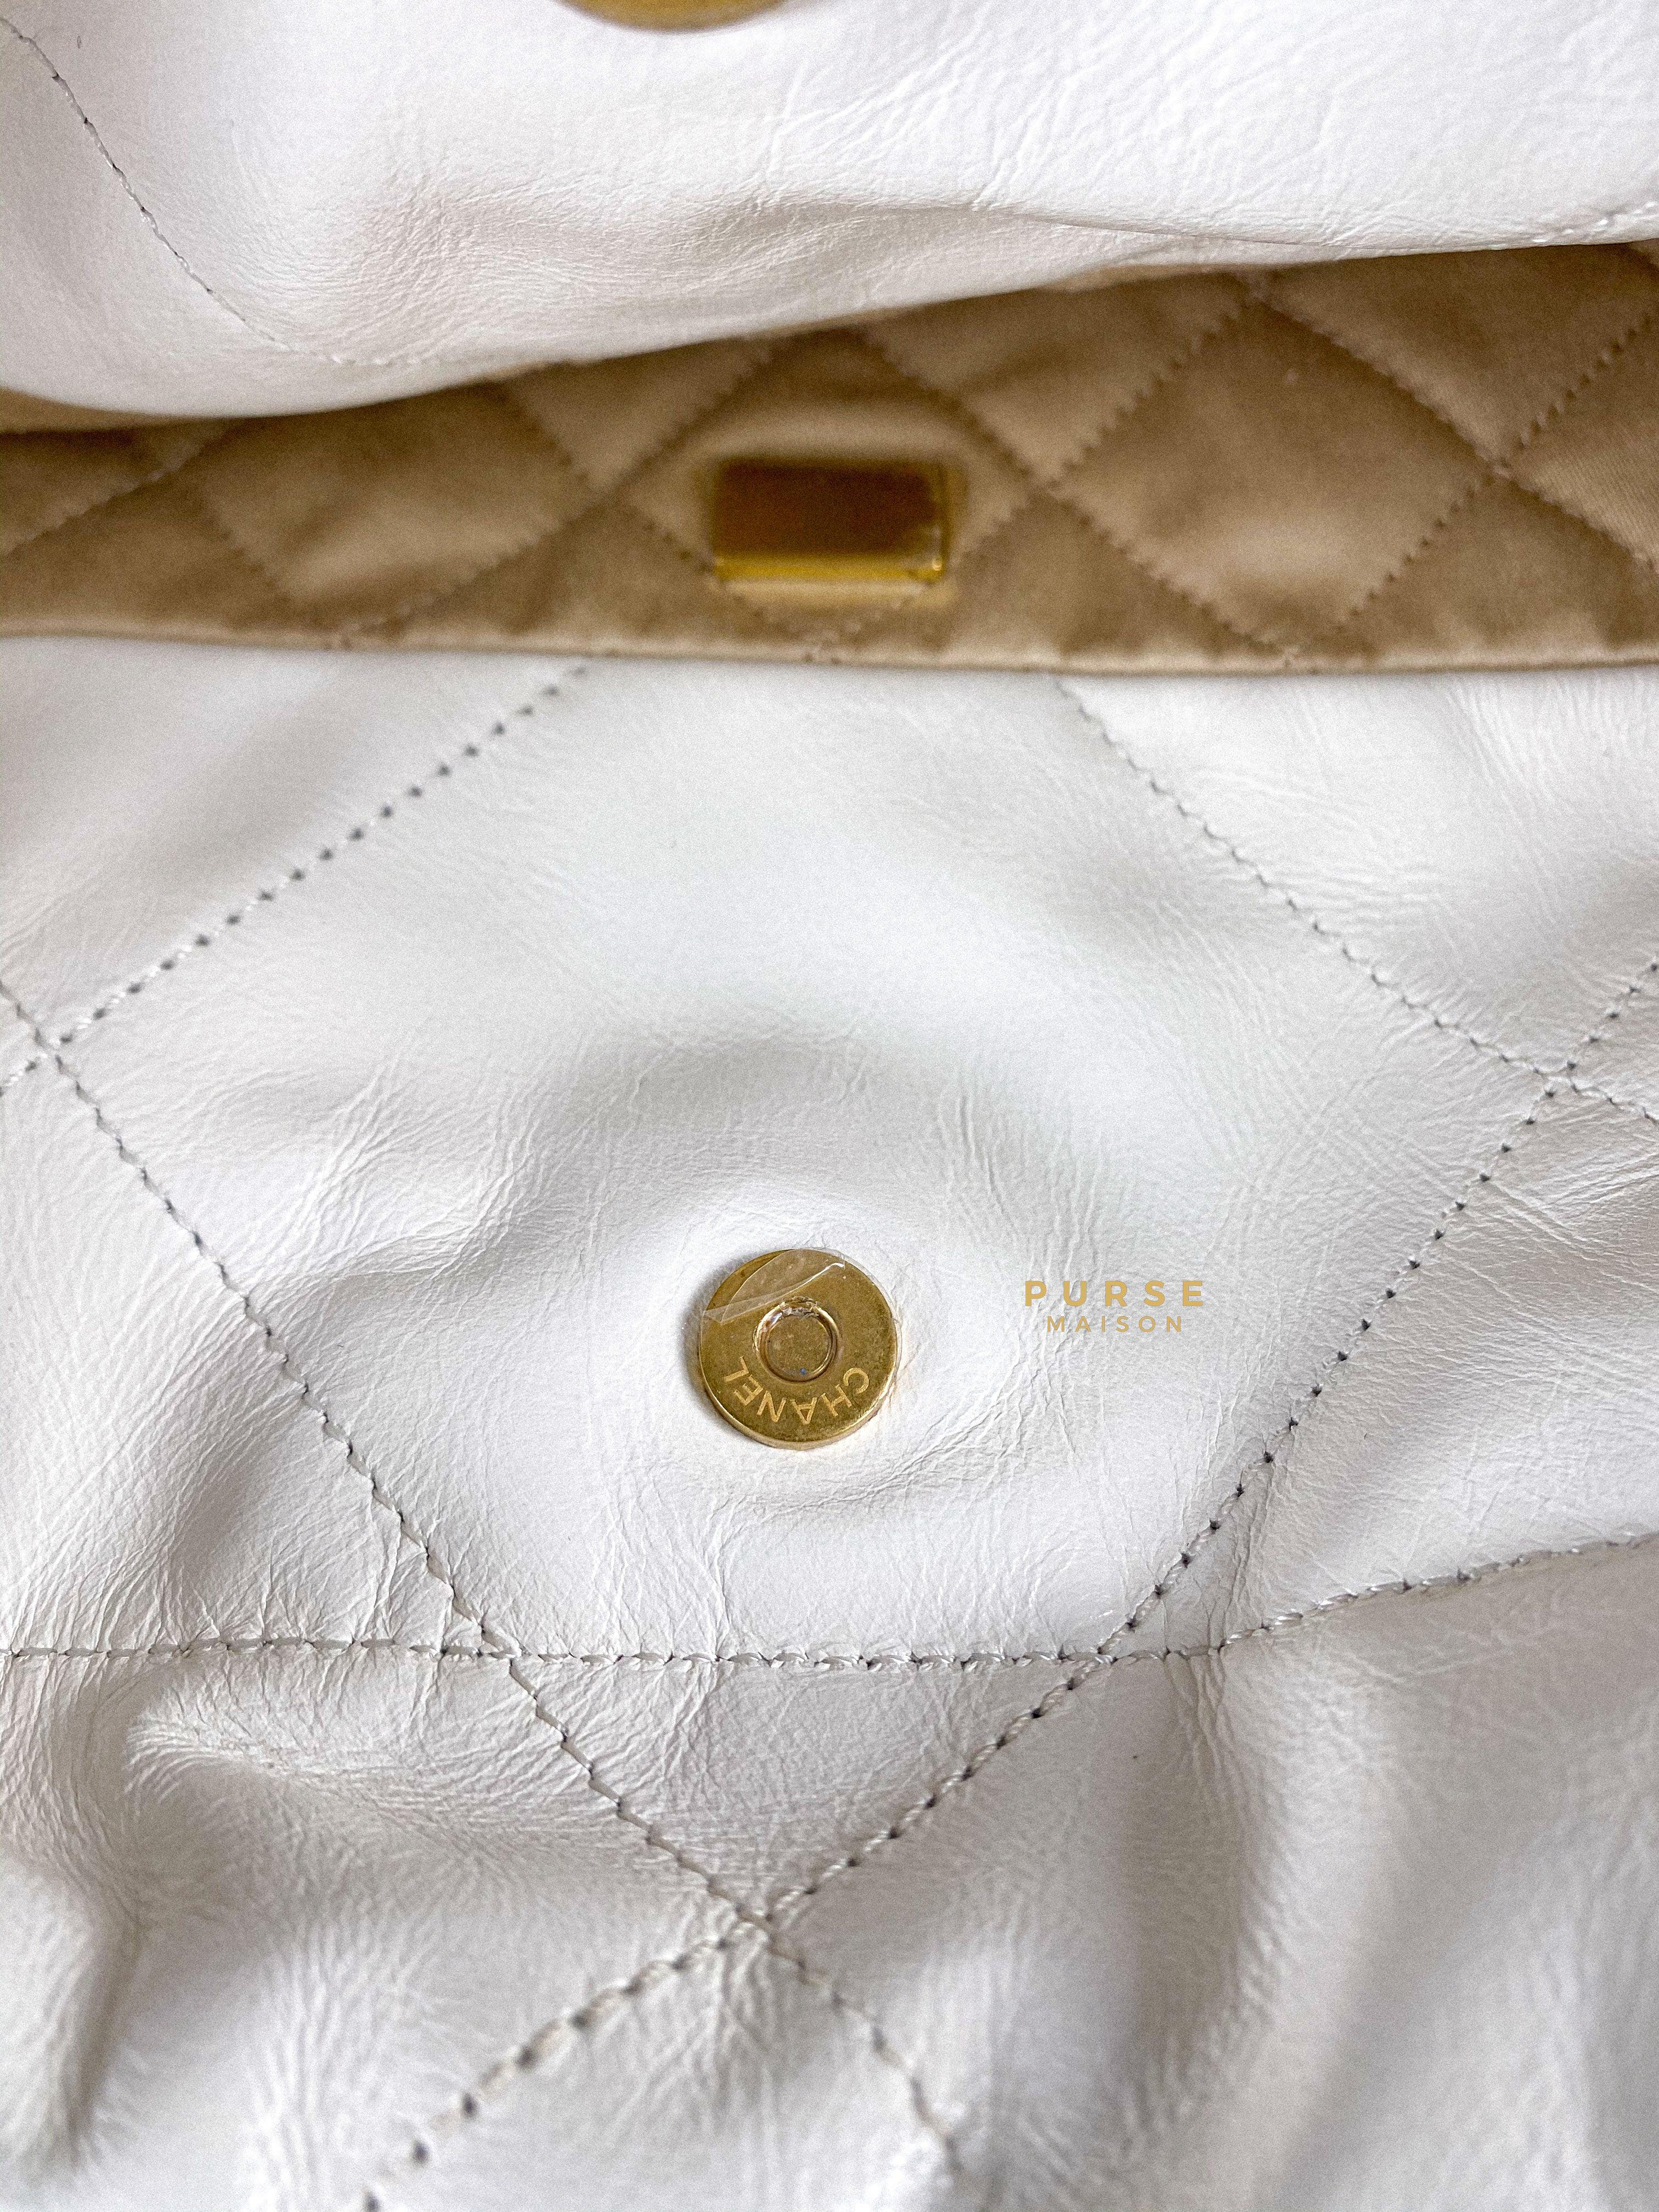 Chanel 22 Small White Calfskin and Aged Gold Hardware (Microchip) | Purse Maison Luxury Bags Shop